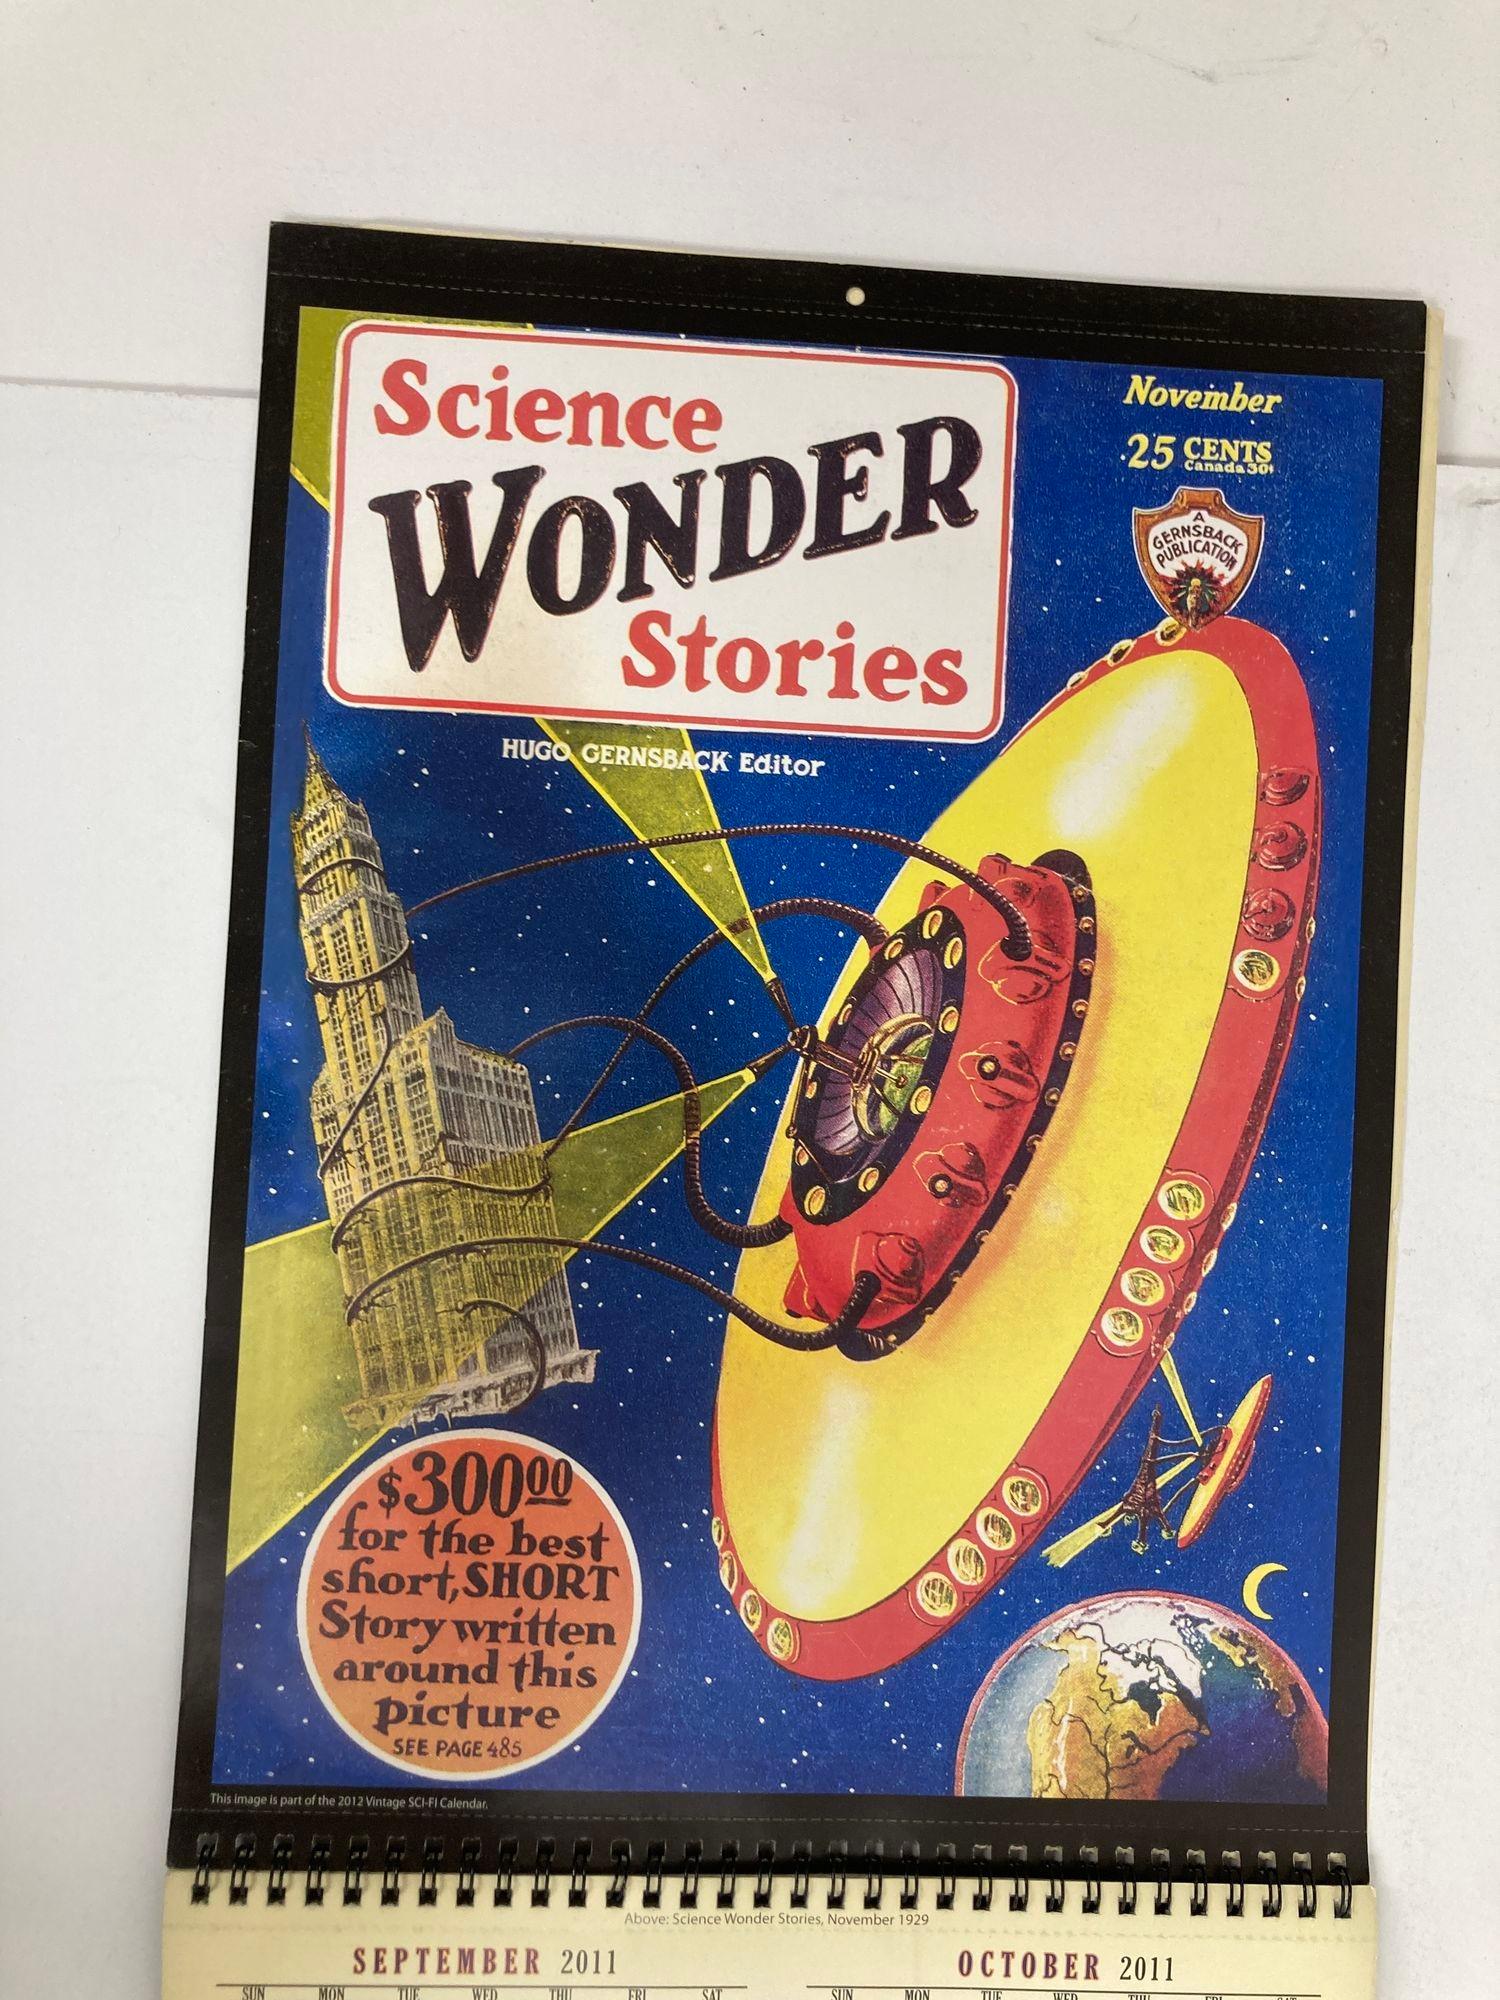 Wonder Stories Calendar 1930s Covers by Gernsback-Frank R Paul Collectible For Sale 2